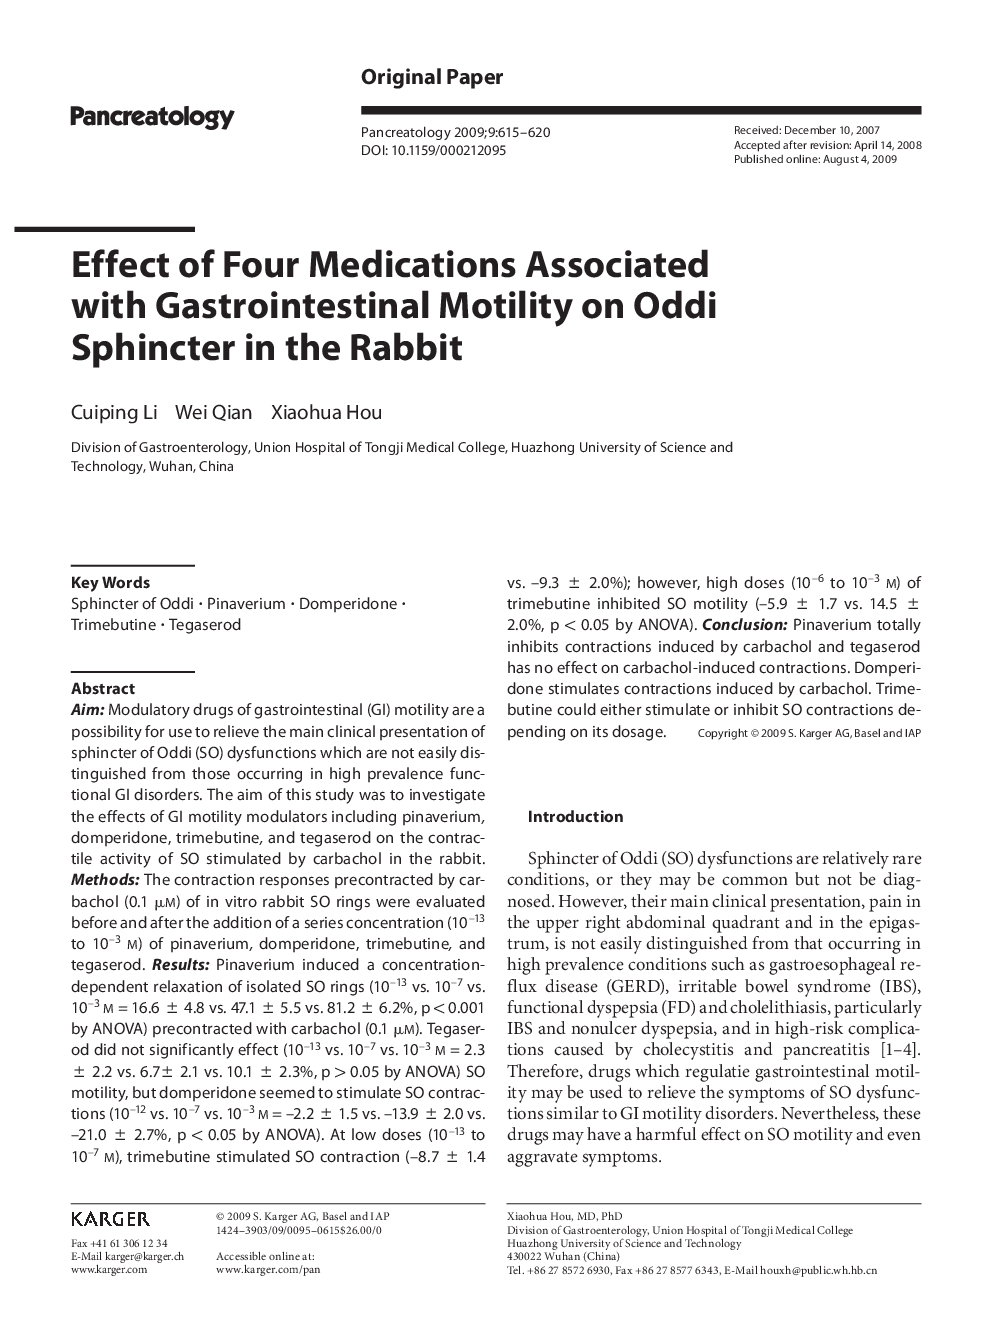 Effect of Four Medications Associated with Gastrointestinal Motility on Oddi Sphincter in the Rabbit